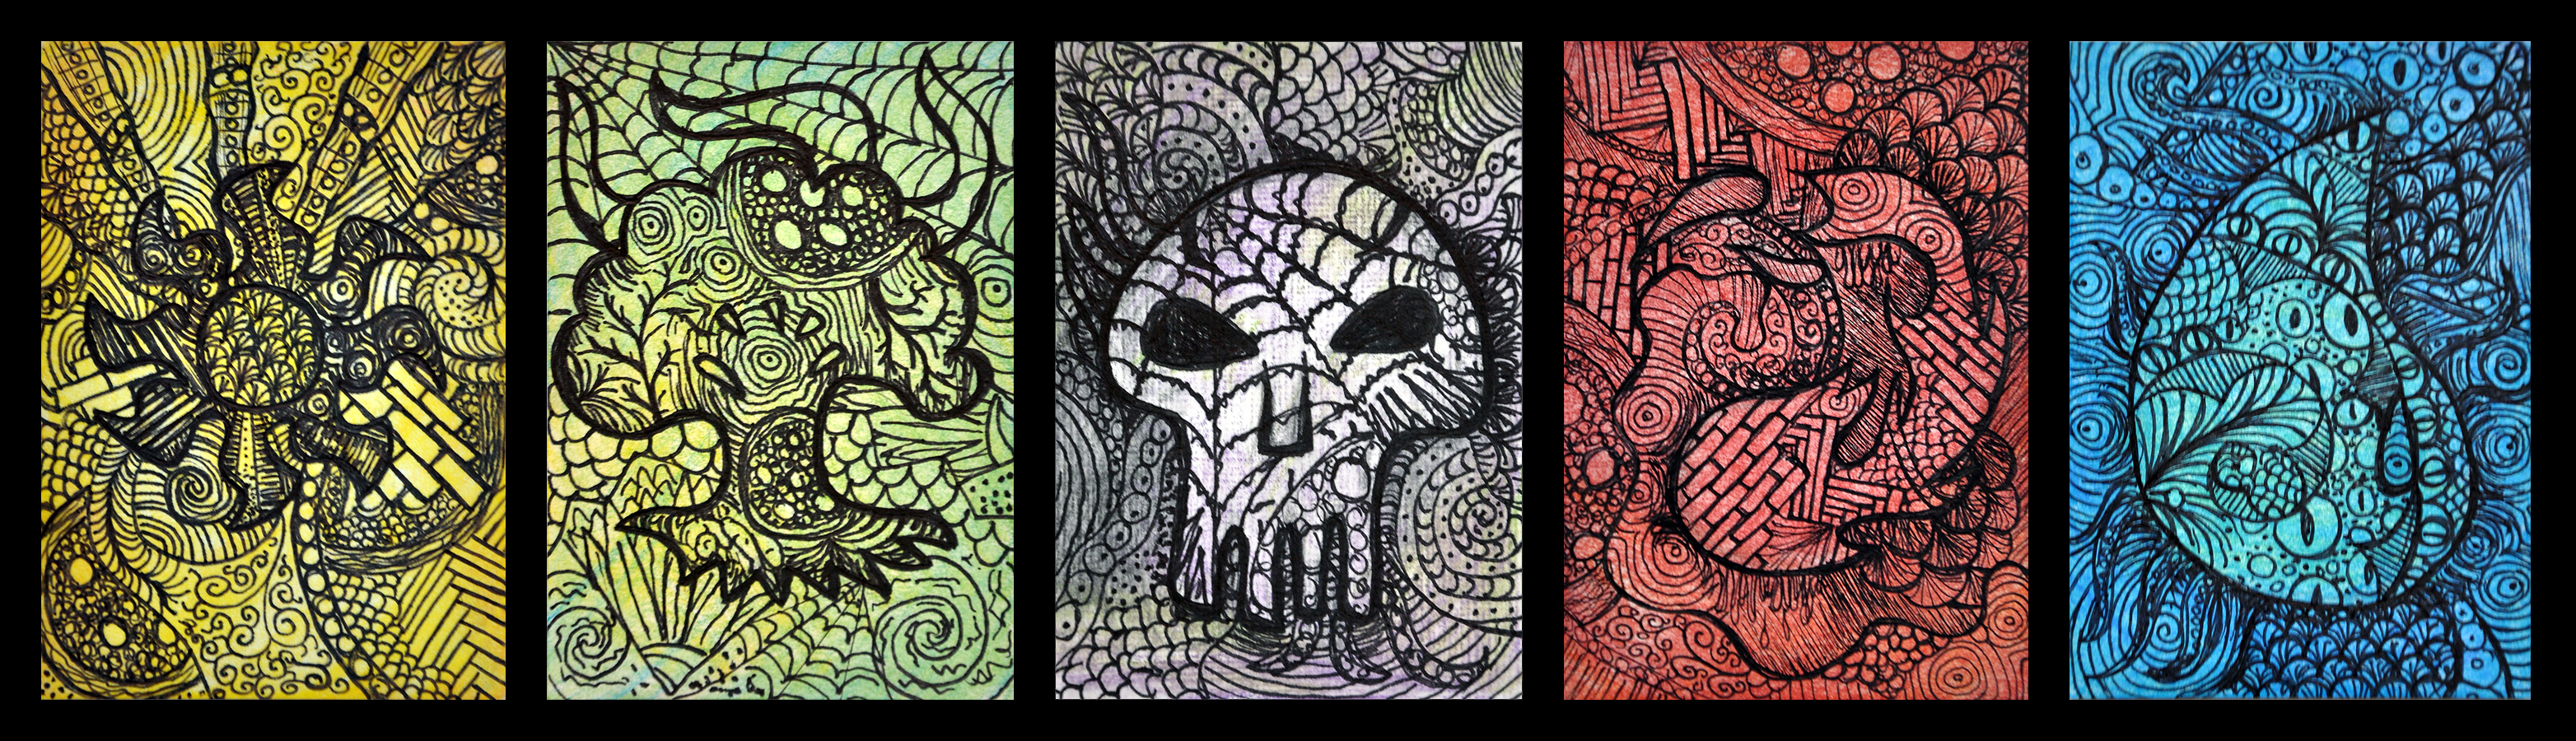 Magic The Gathering Zentanlge Mana Symbol Atcs By Hell0z0mbie On Deviantart